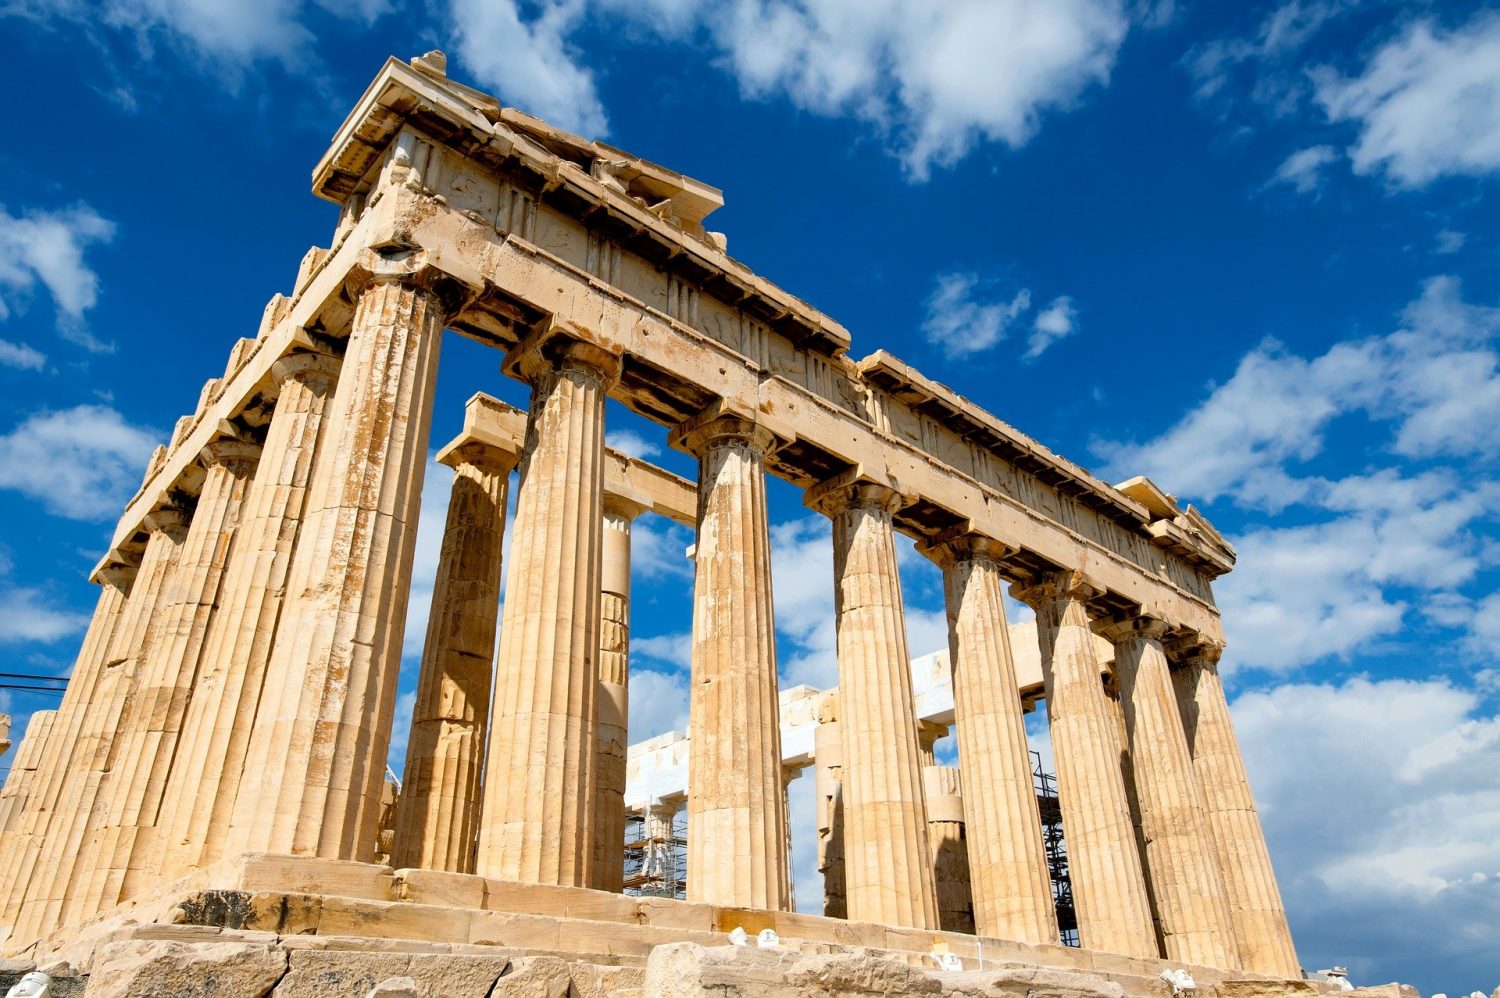 Merrill Area Chamber Invites Chamber and community members to enjoy a trip to Ancient Greece